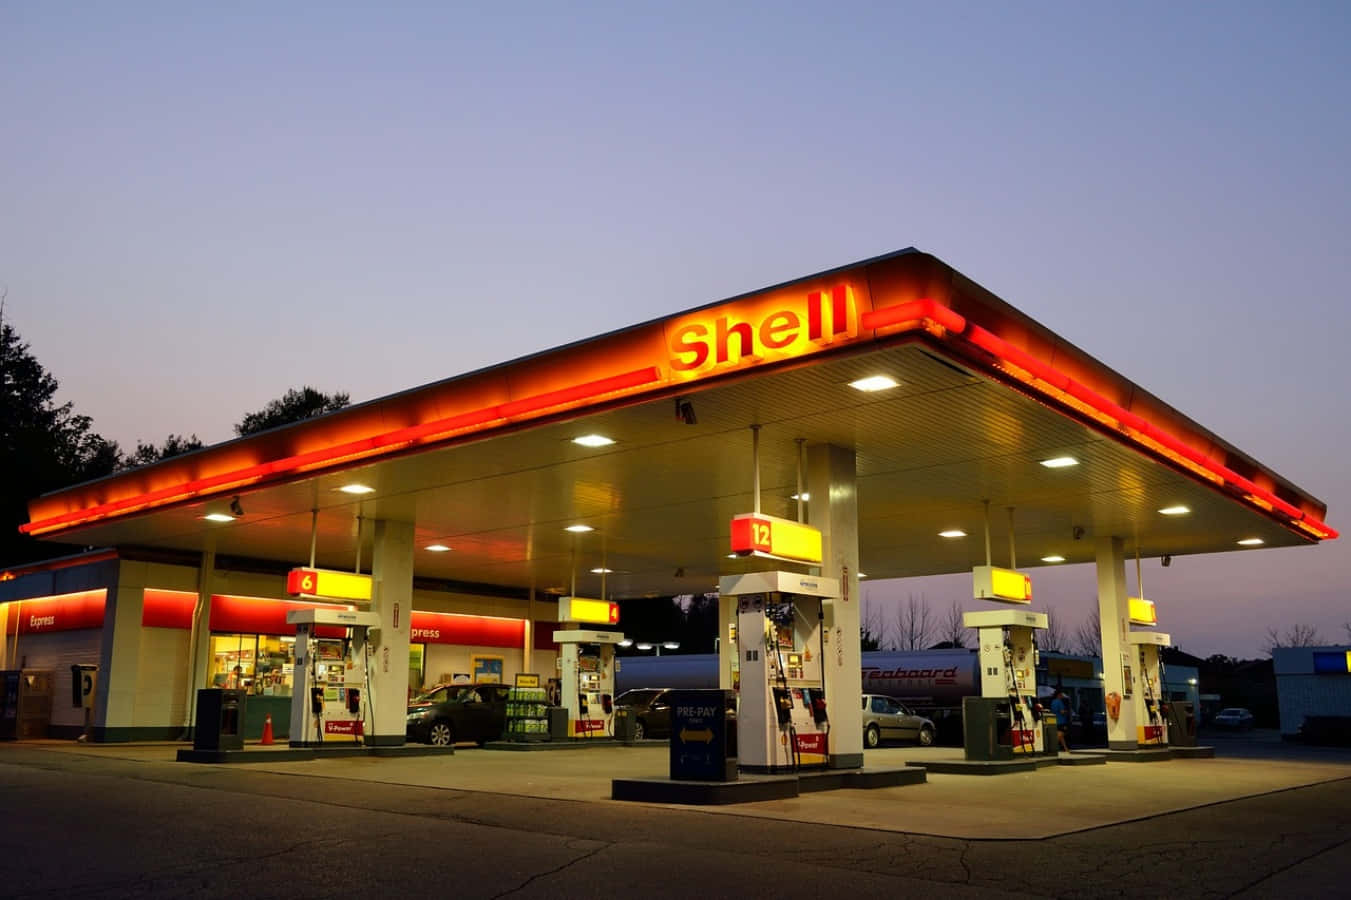 Image  Refueling your vehicle at the petrol station